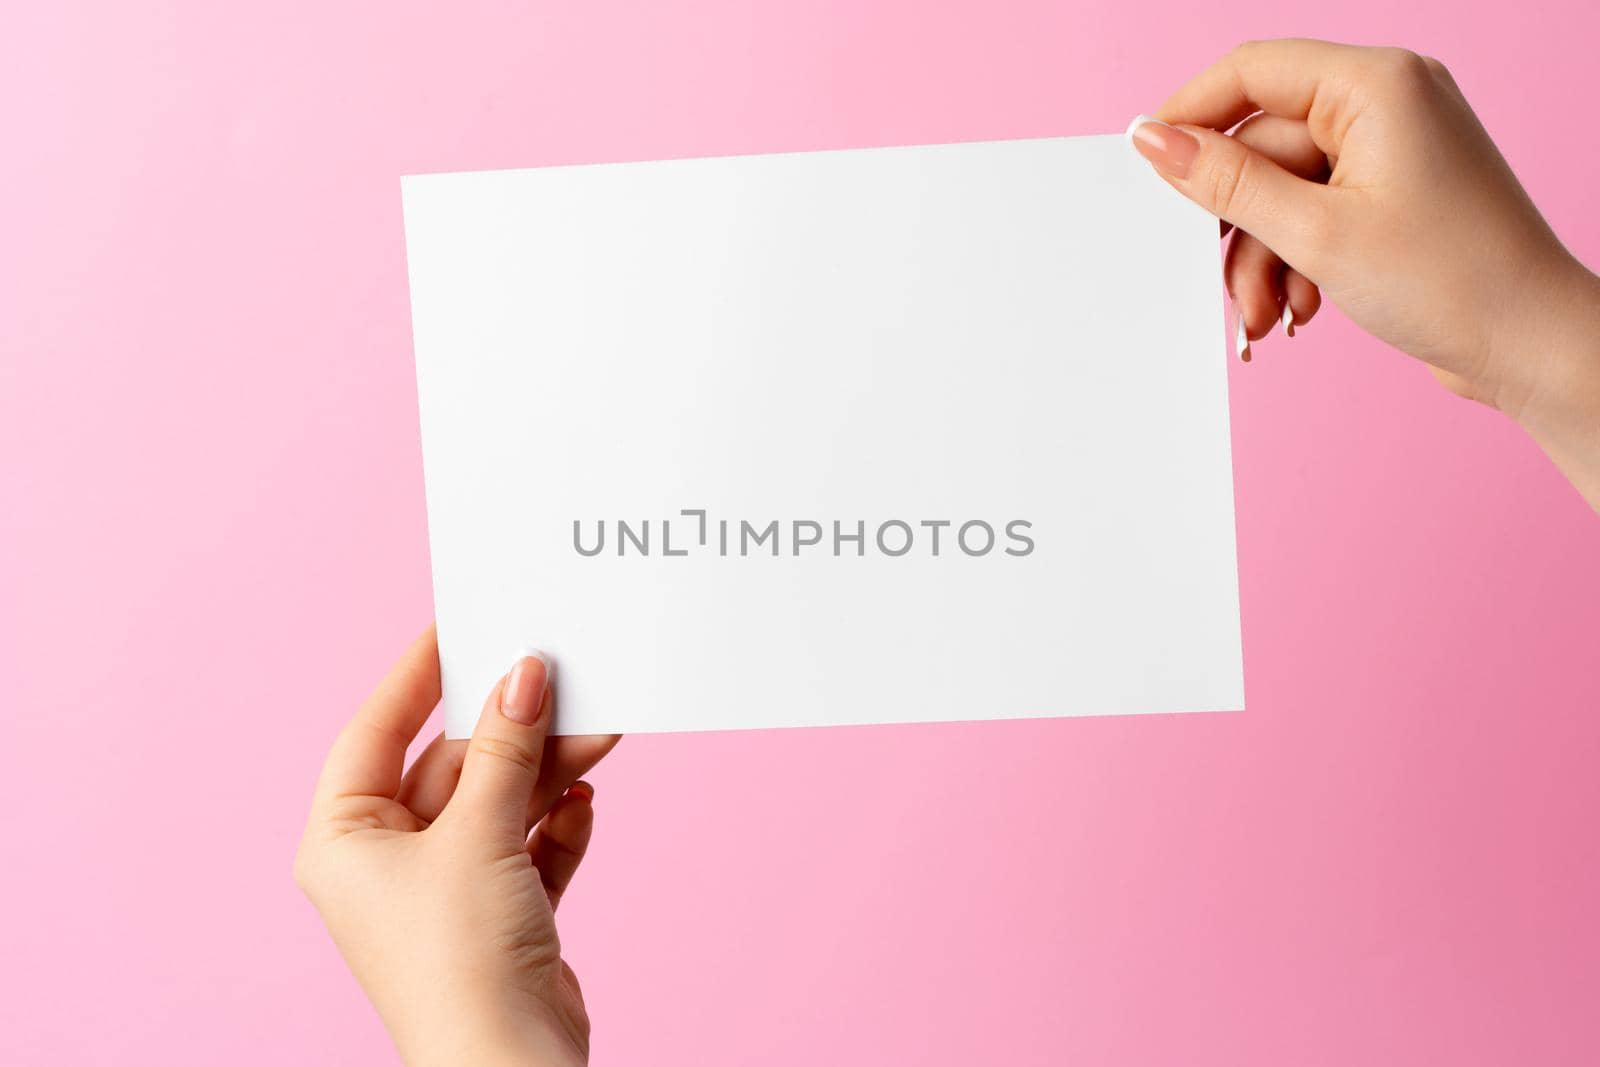 Woman hand showing blank business card on pink background. Close up.